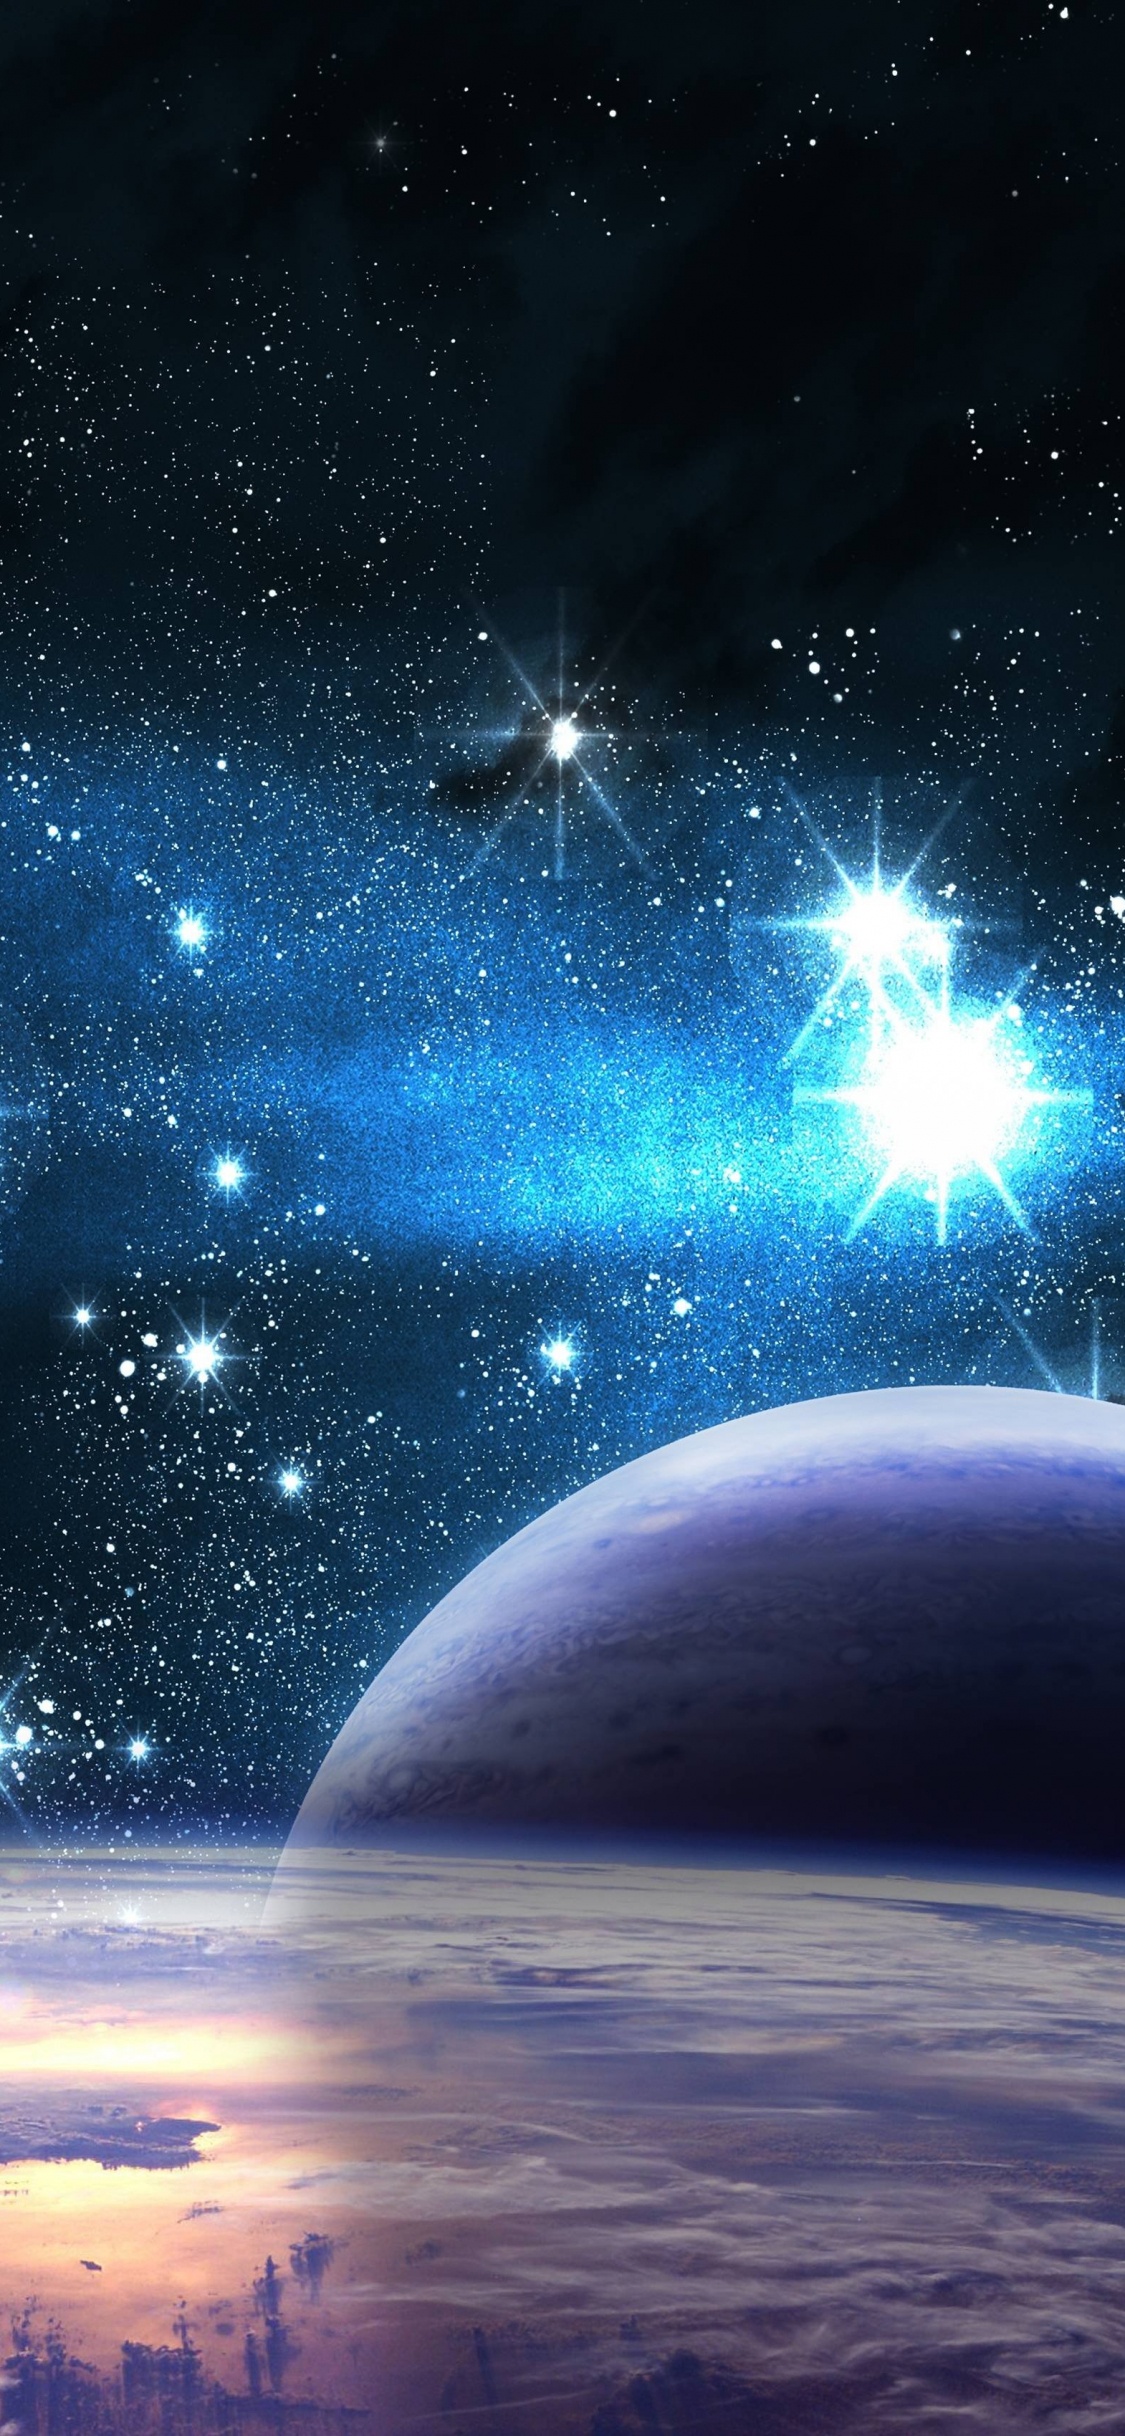 Blue and White Planet With Stars. Wallpaper in 1125x2436 Resolution